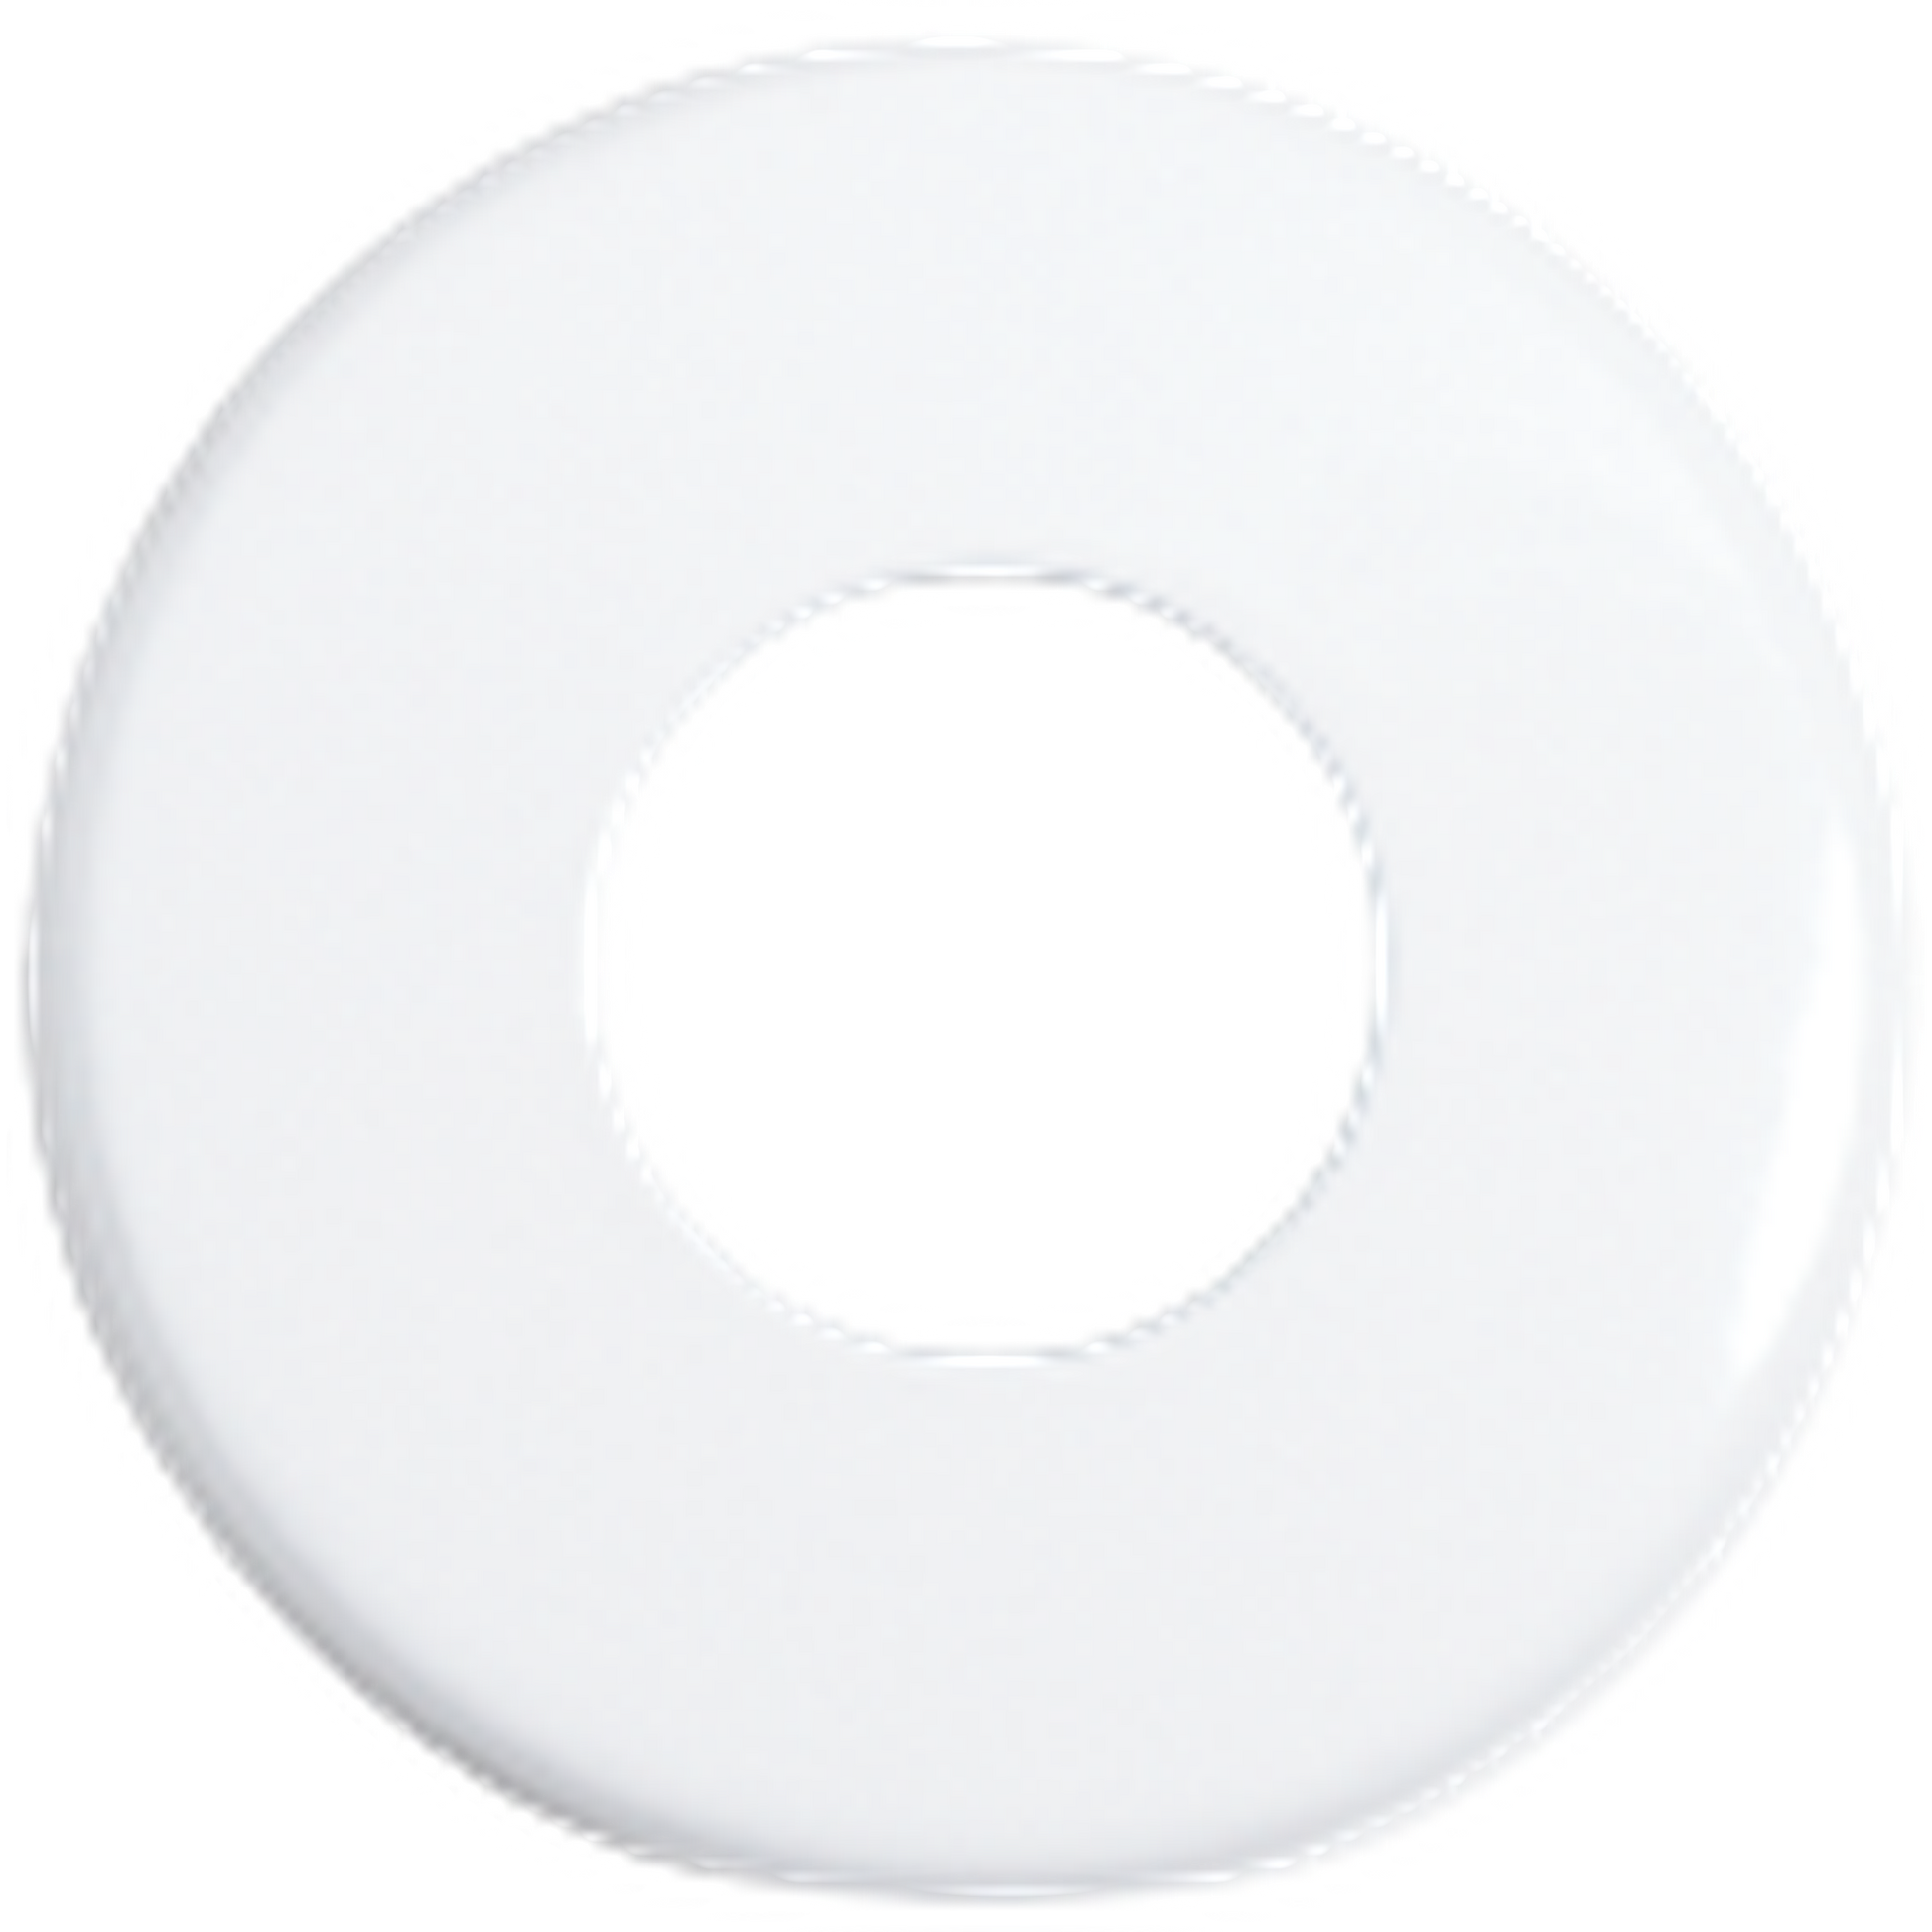 Seachrome Signature Series White Wrinkle Powder Coat Straight Post Flange for 1" Shower Rods With Exposed Screws